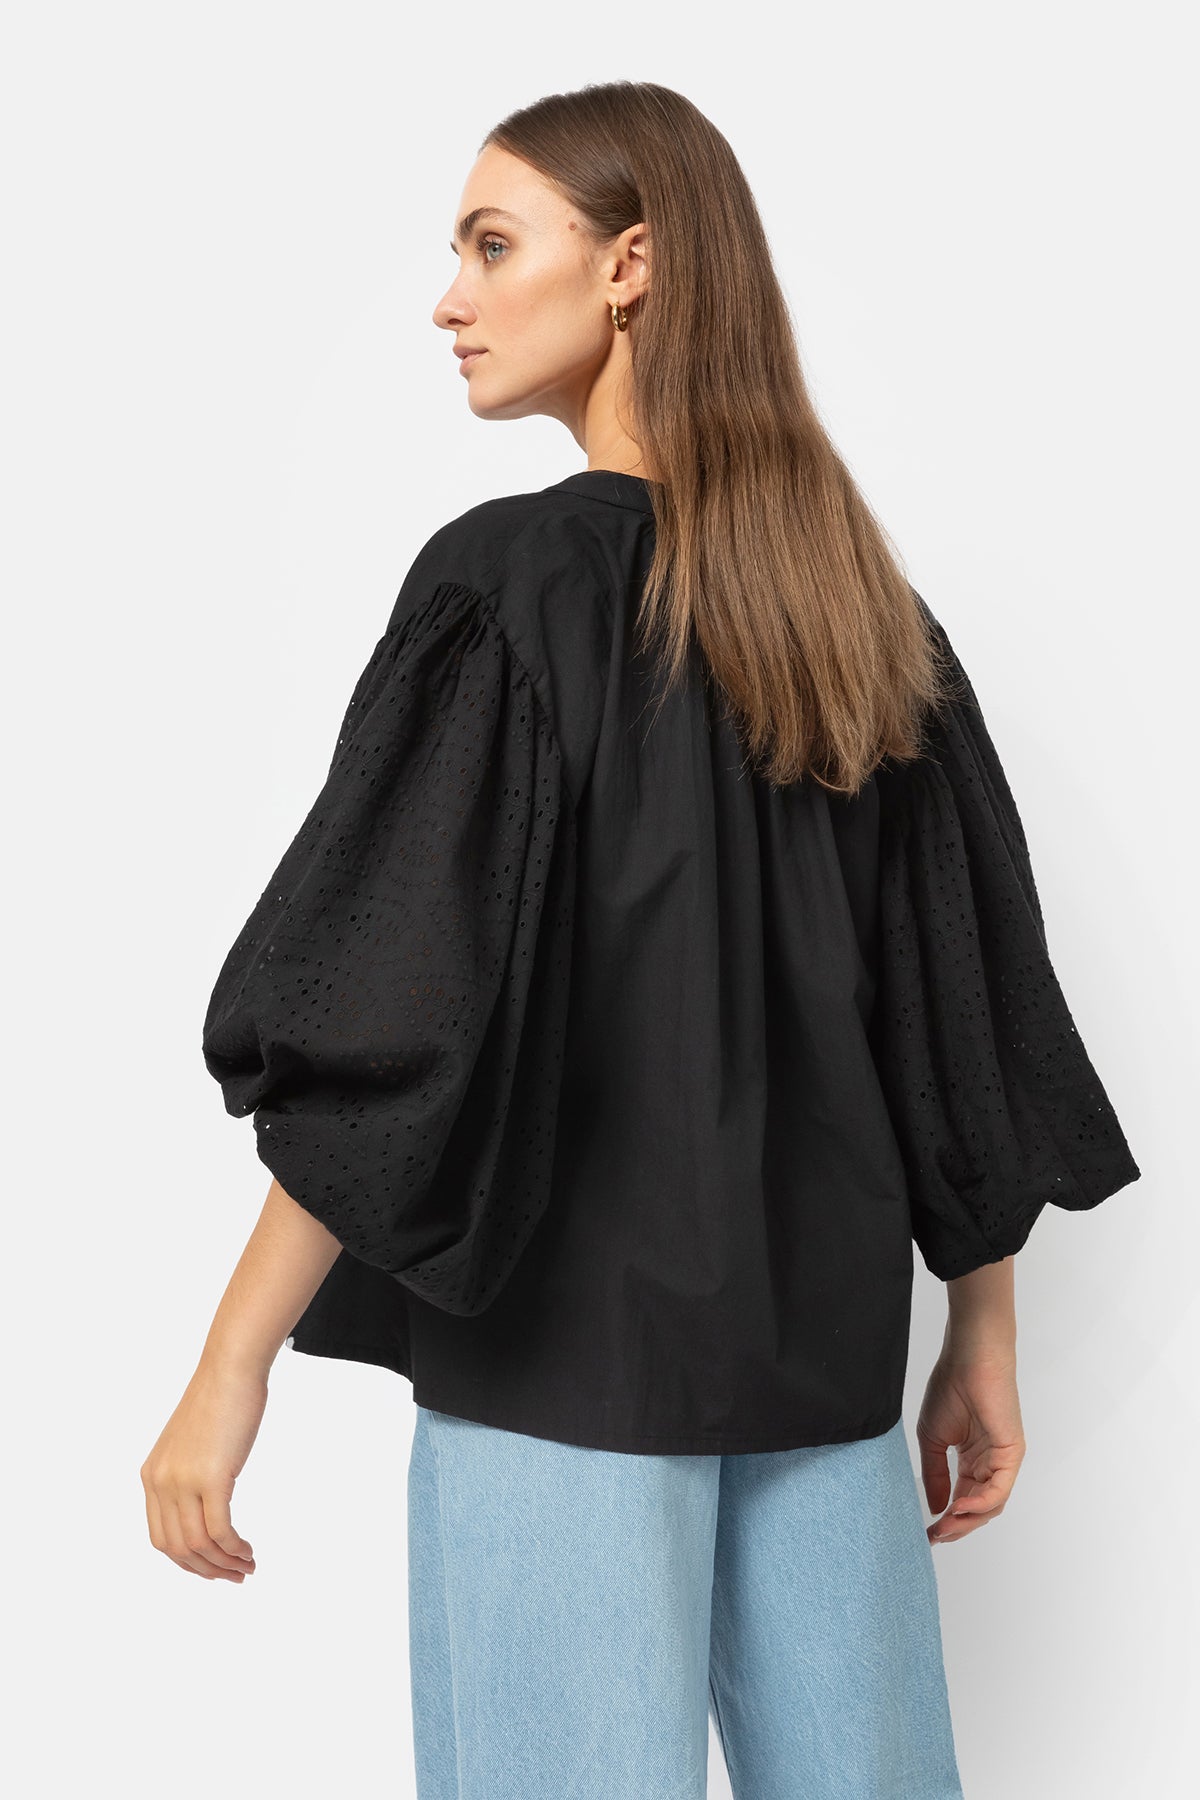 Islande Top with Puff Sleeves | Black Embroidered Cotton